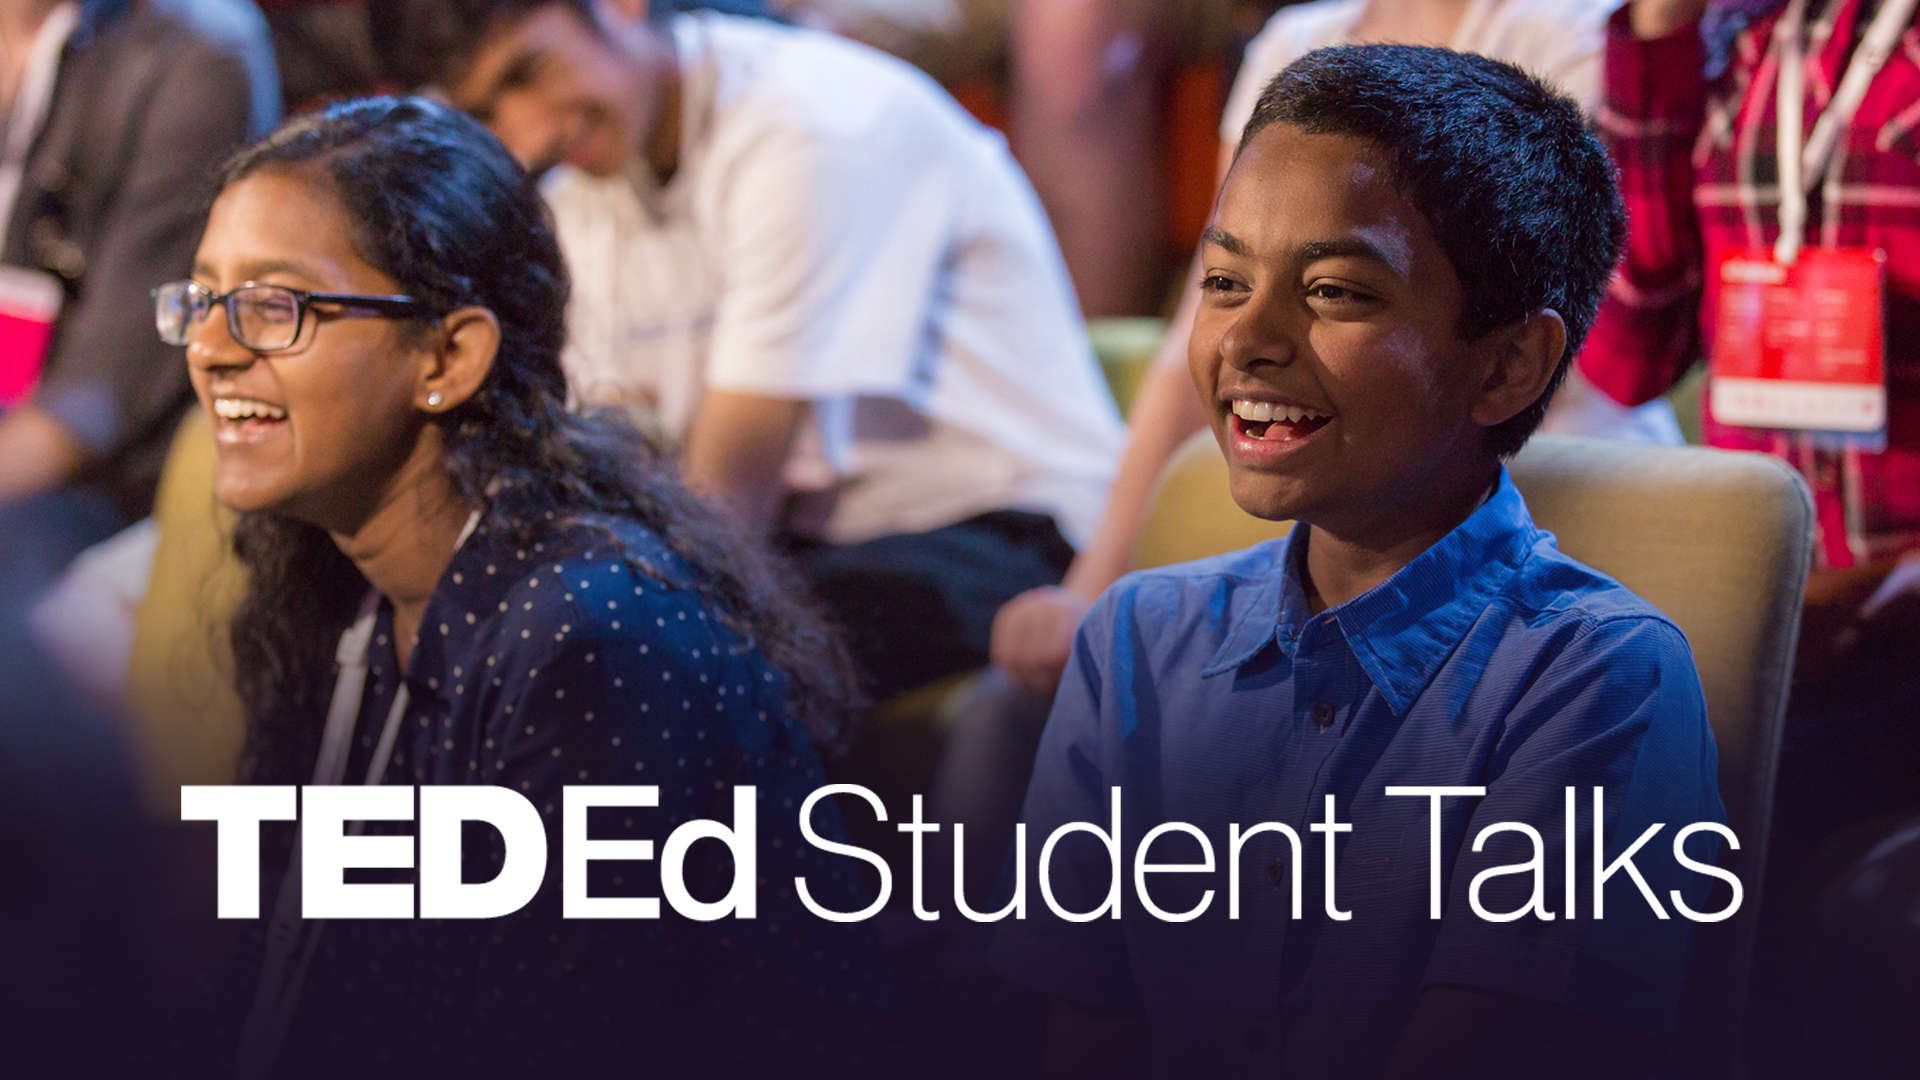 Bring TED-Ed Student Talks to Your School